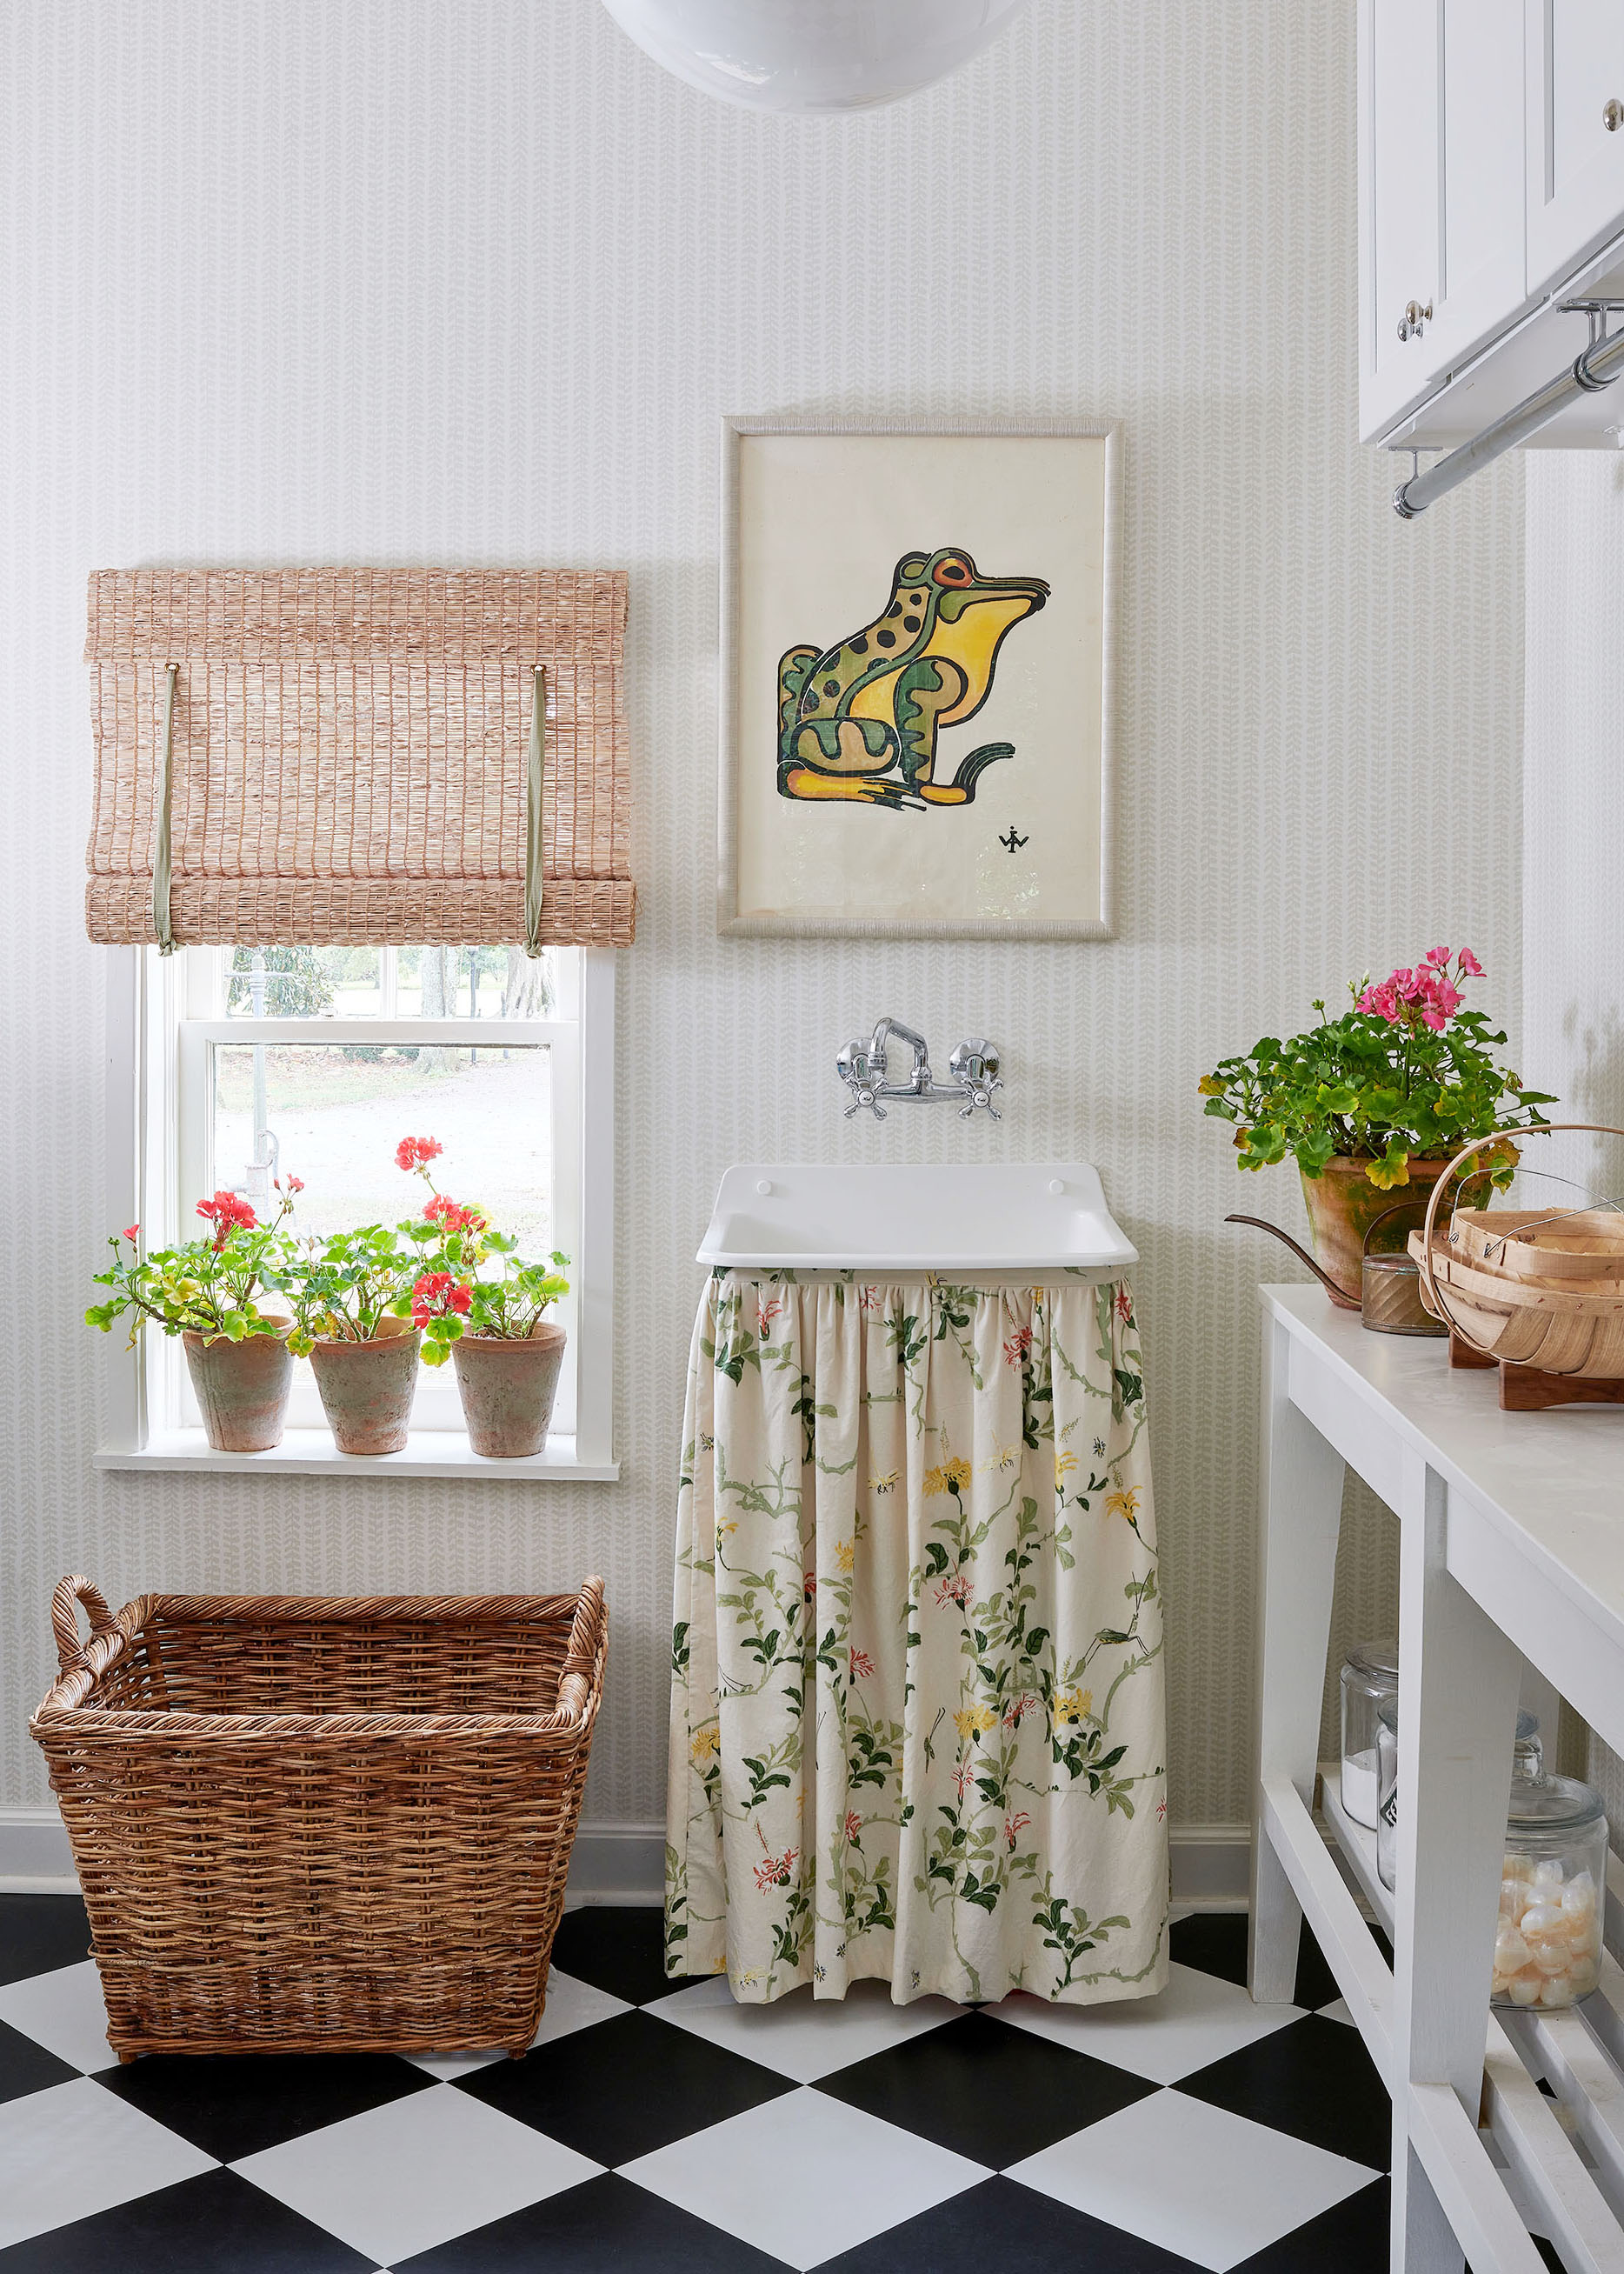 Laundry roo with sink  in Arkansas Home by Heather Chadduck in Veranda Magazine by Alison Gootee photography